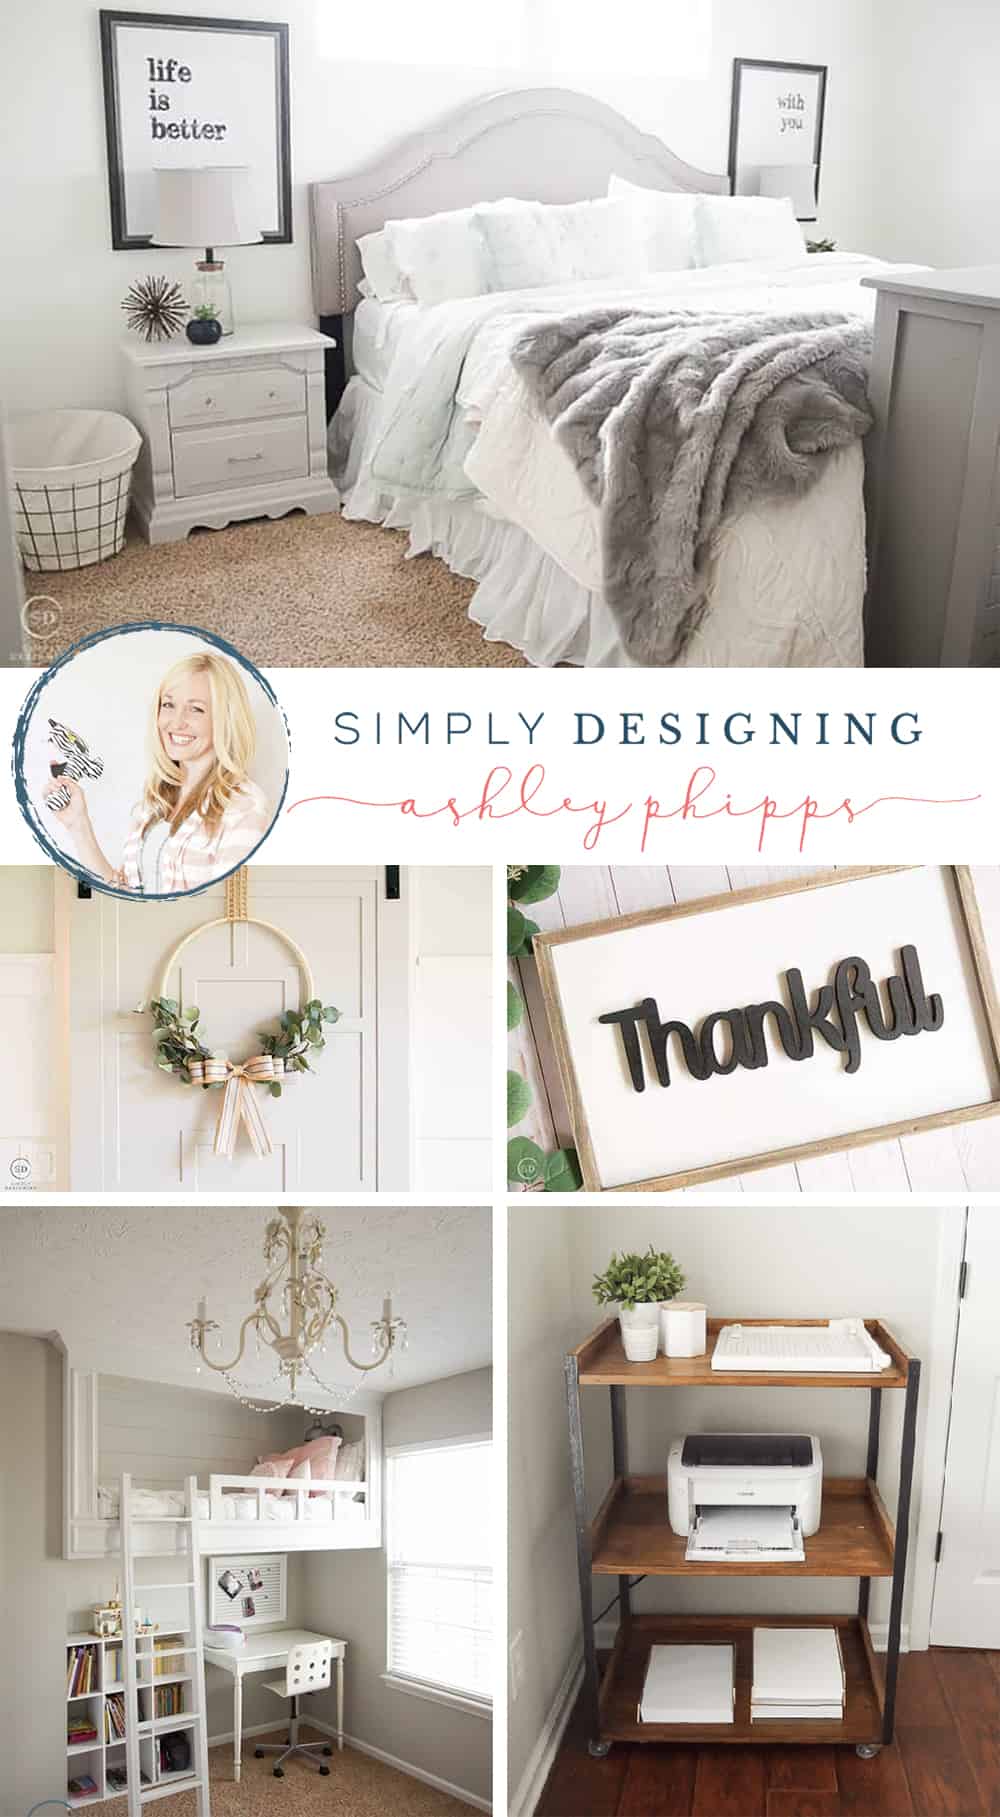 SimplyDesigning AshleyPhipps | 45 Light Bright and Beautiful Home Inspiration Ideas | 33 | clean and organize